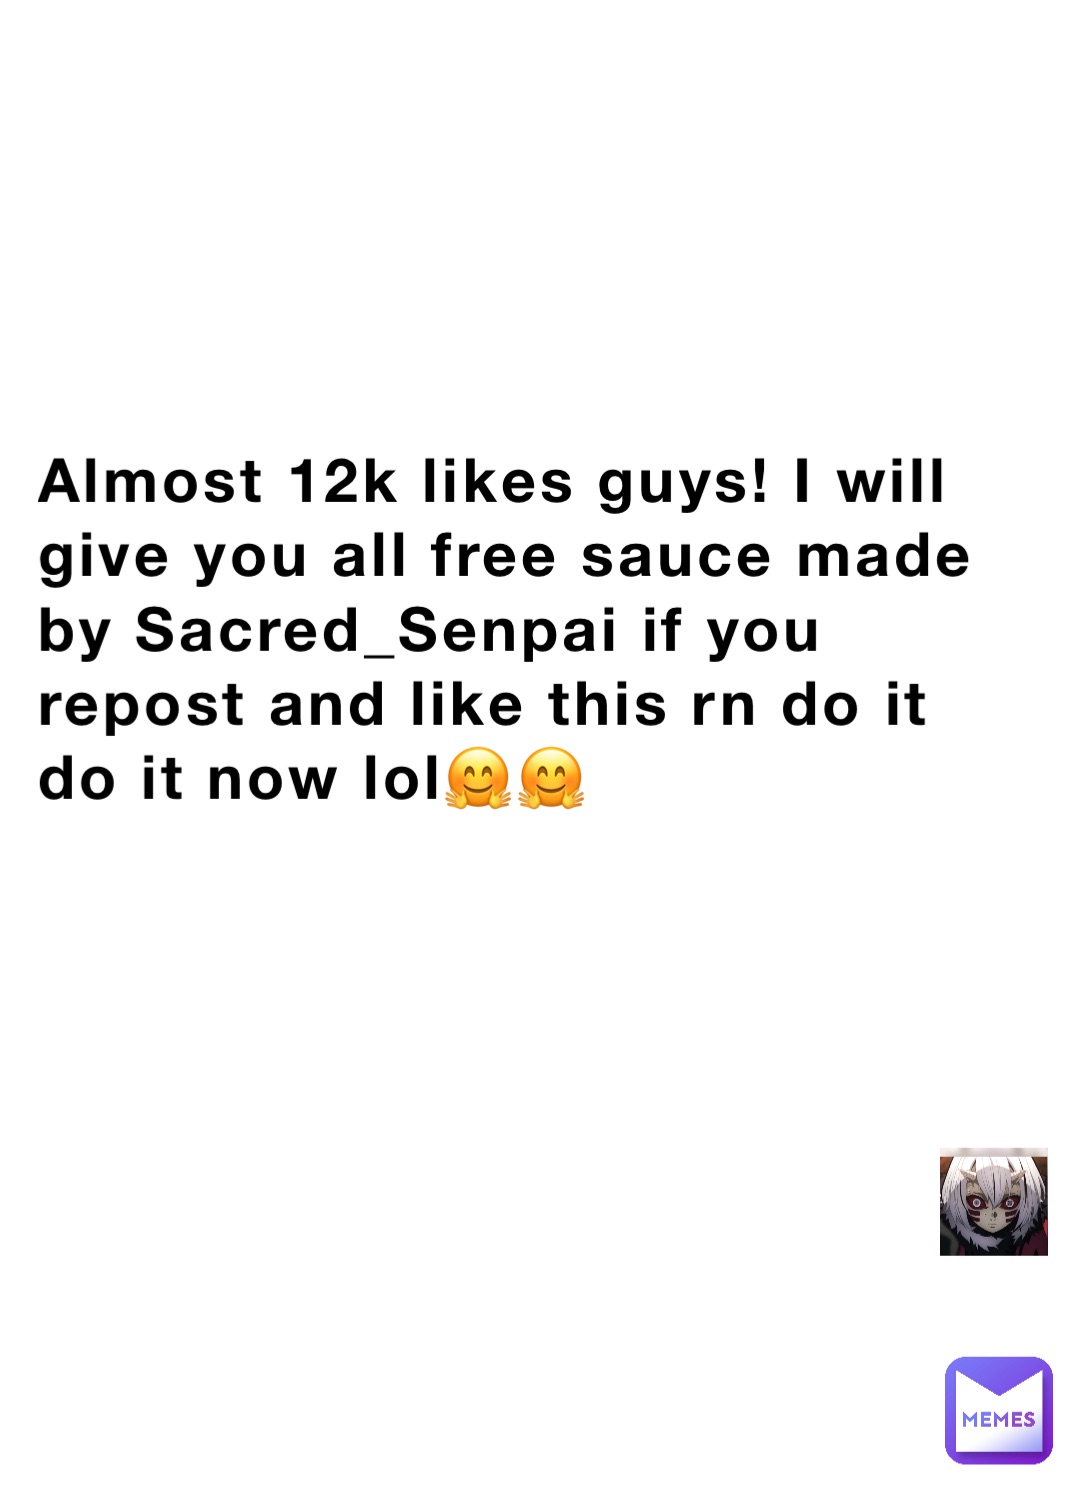 Almost 12k likes guys! I will give you all free sauce made by Sacred_Senpai if you repost and like this rn do it do it now lol🤗🤗